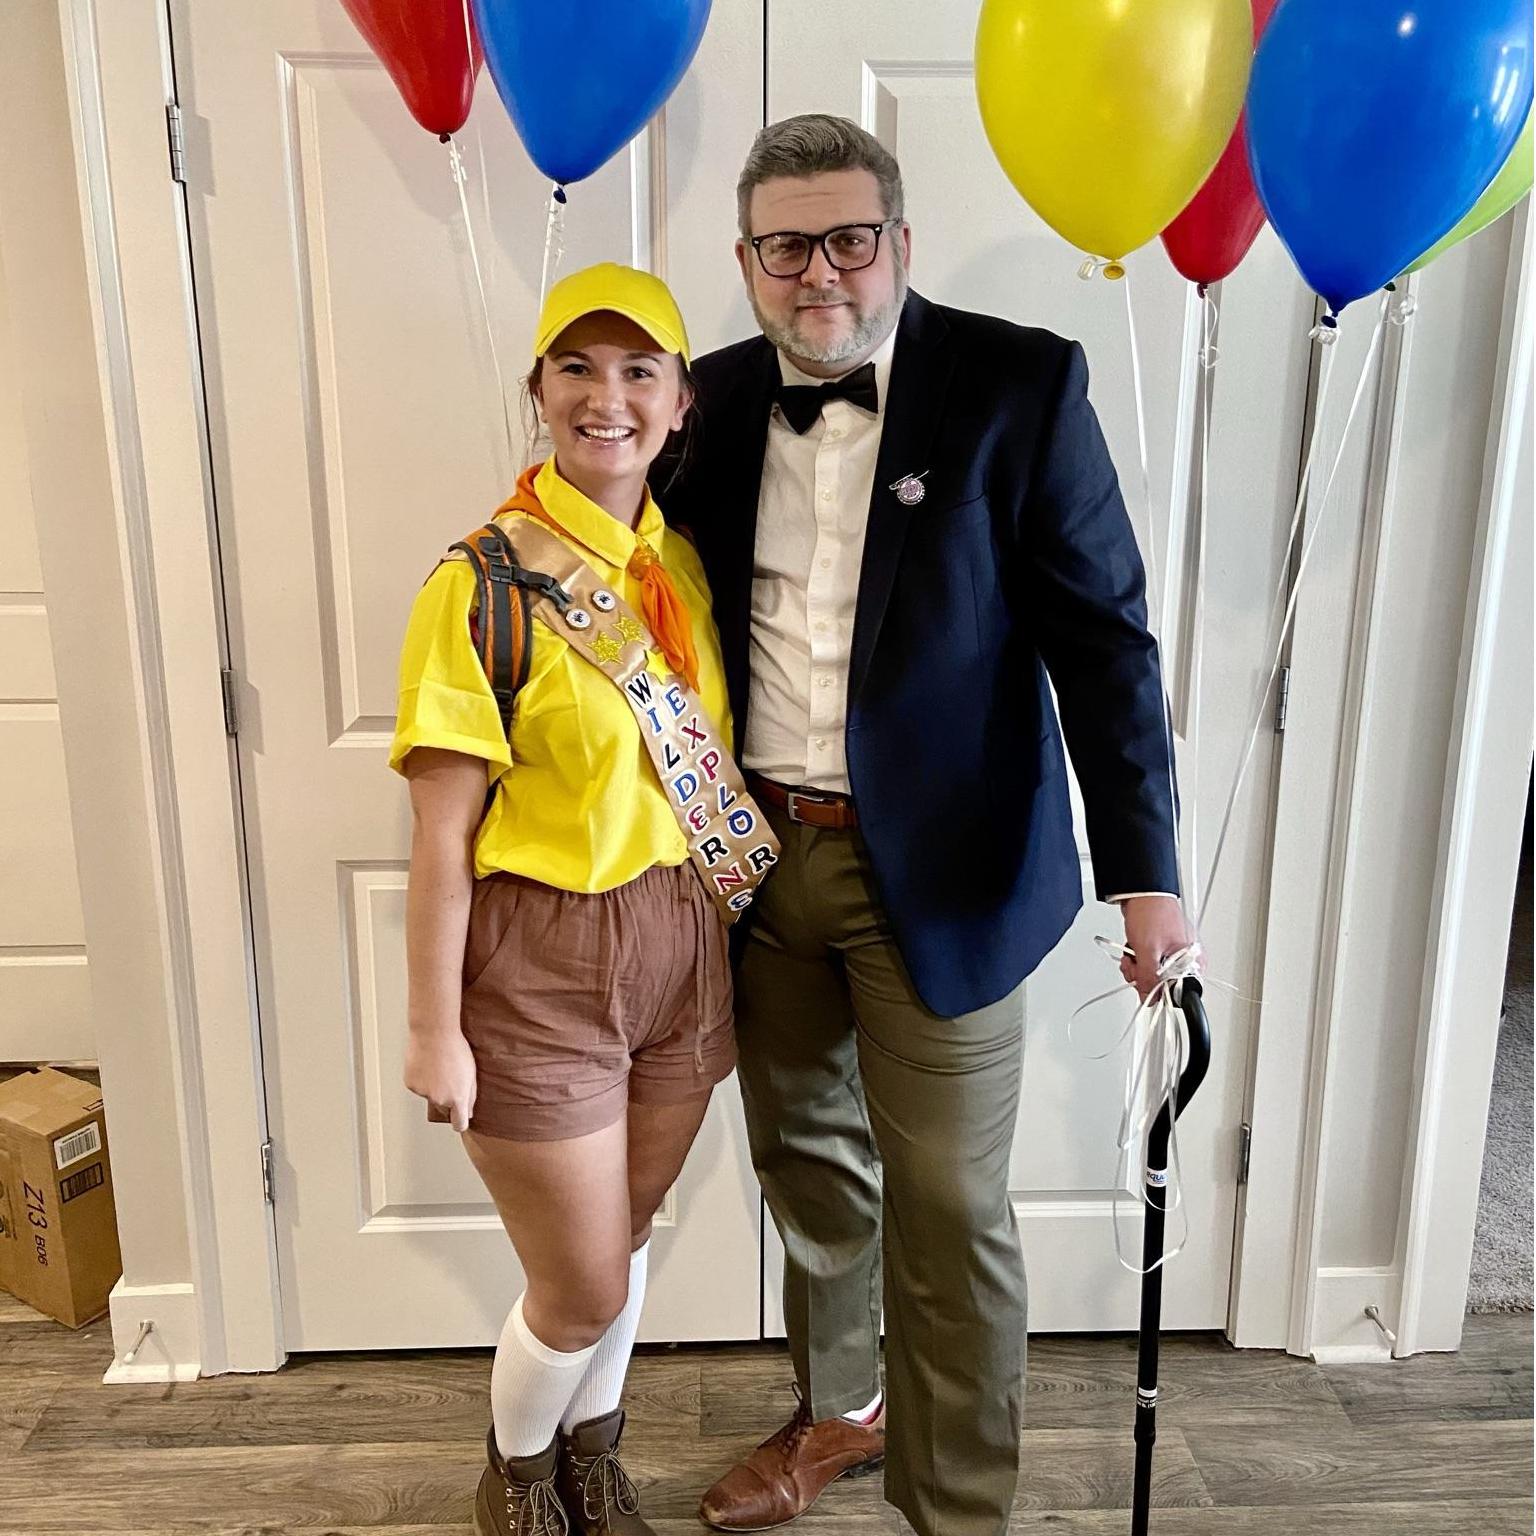 For Halloween 2020, we dressed up as Russell & Mr. Fredrickson from UP. We got so many compliments on this costume & even participated in a costume contest.